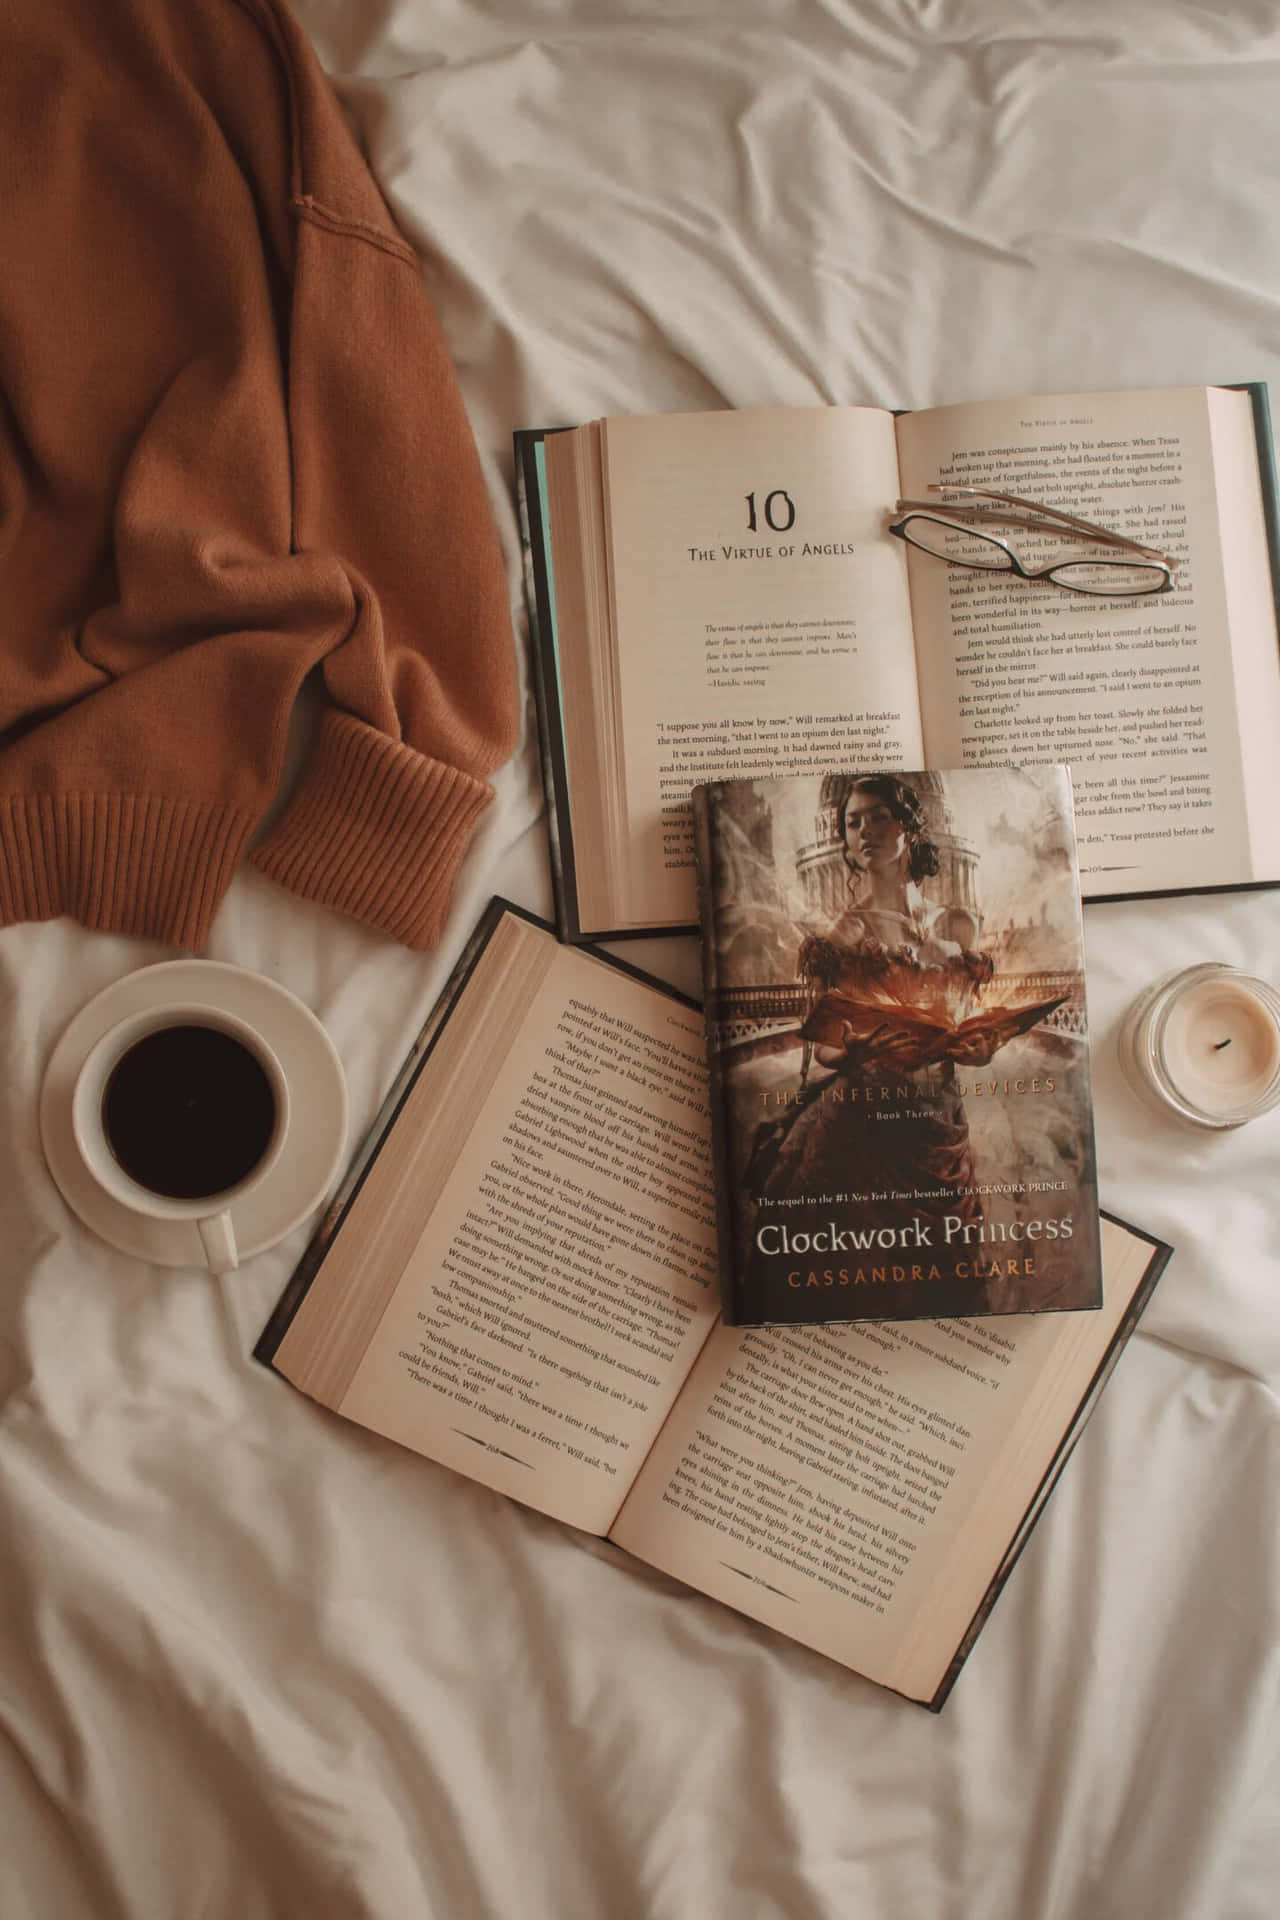 A Book, Coffee, And Glasses On A Bed